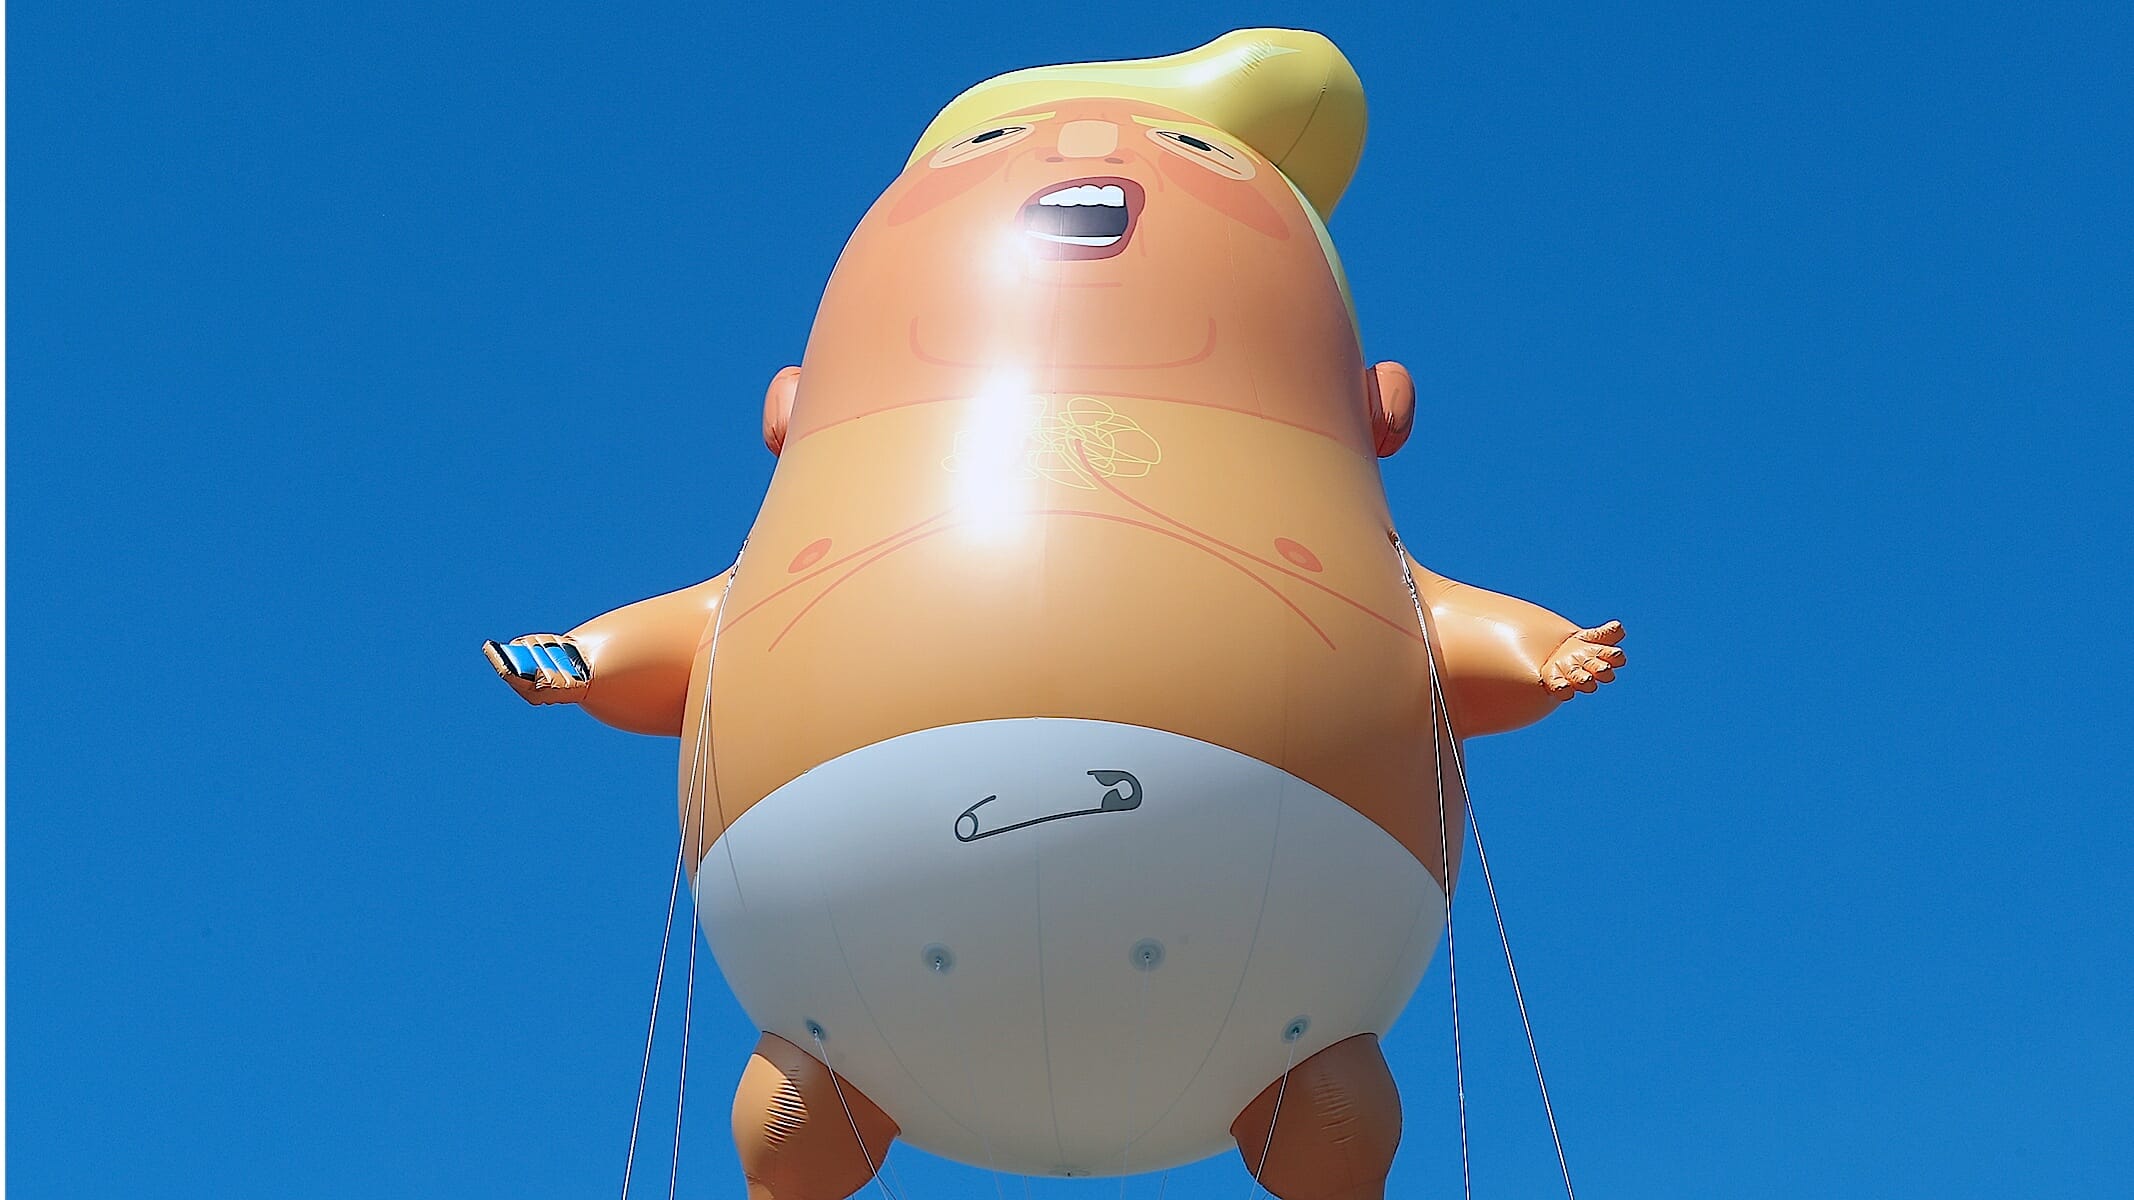 Good News for Fans of the Baby Trump Balloon: He’s Coming to D.C.